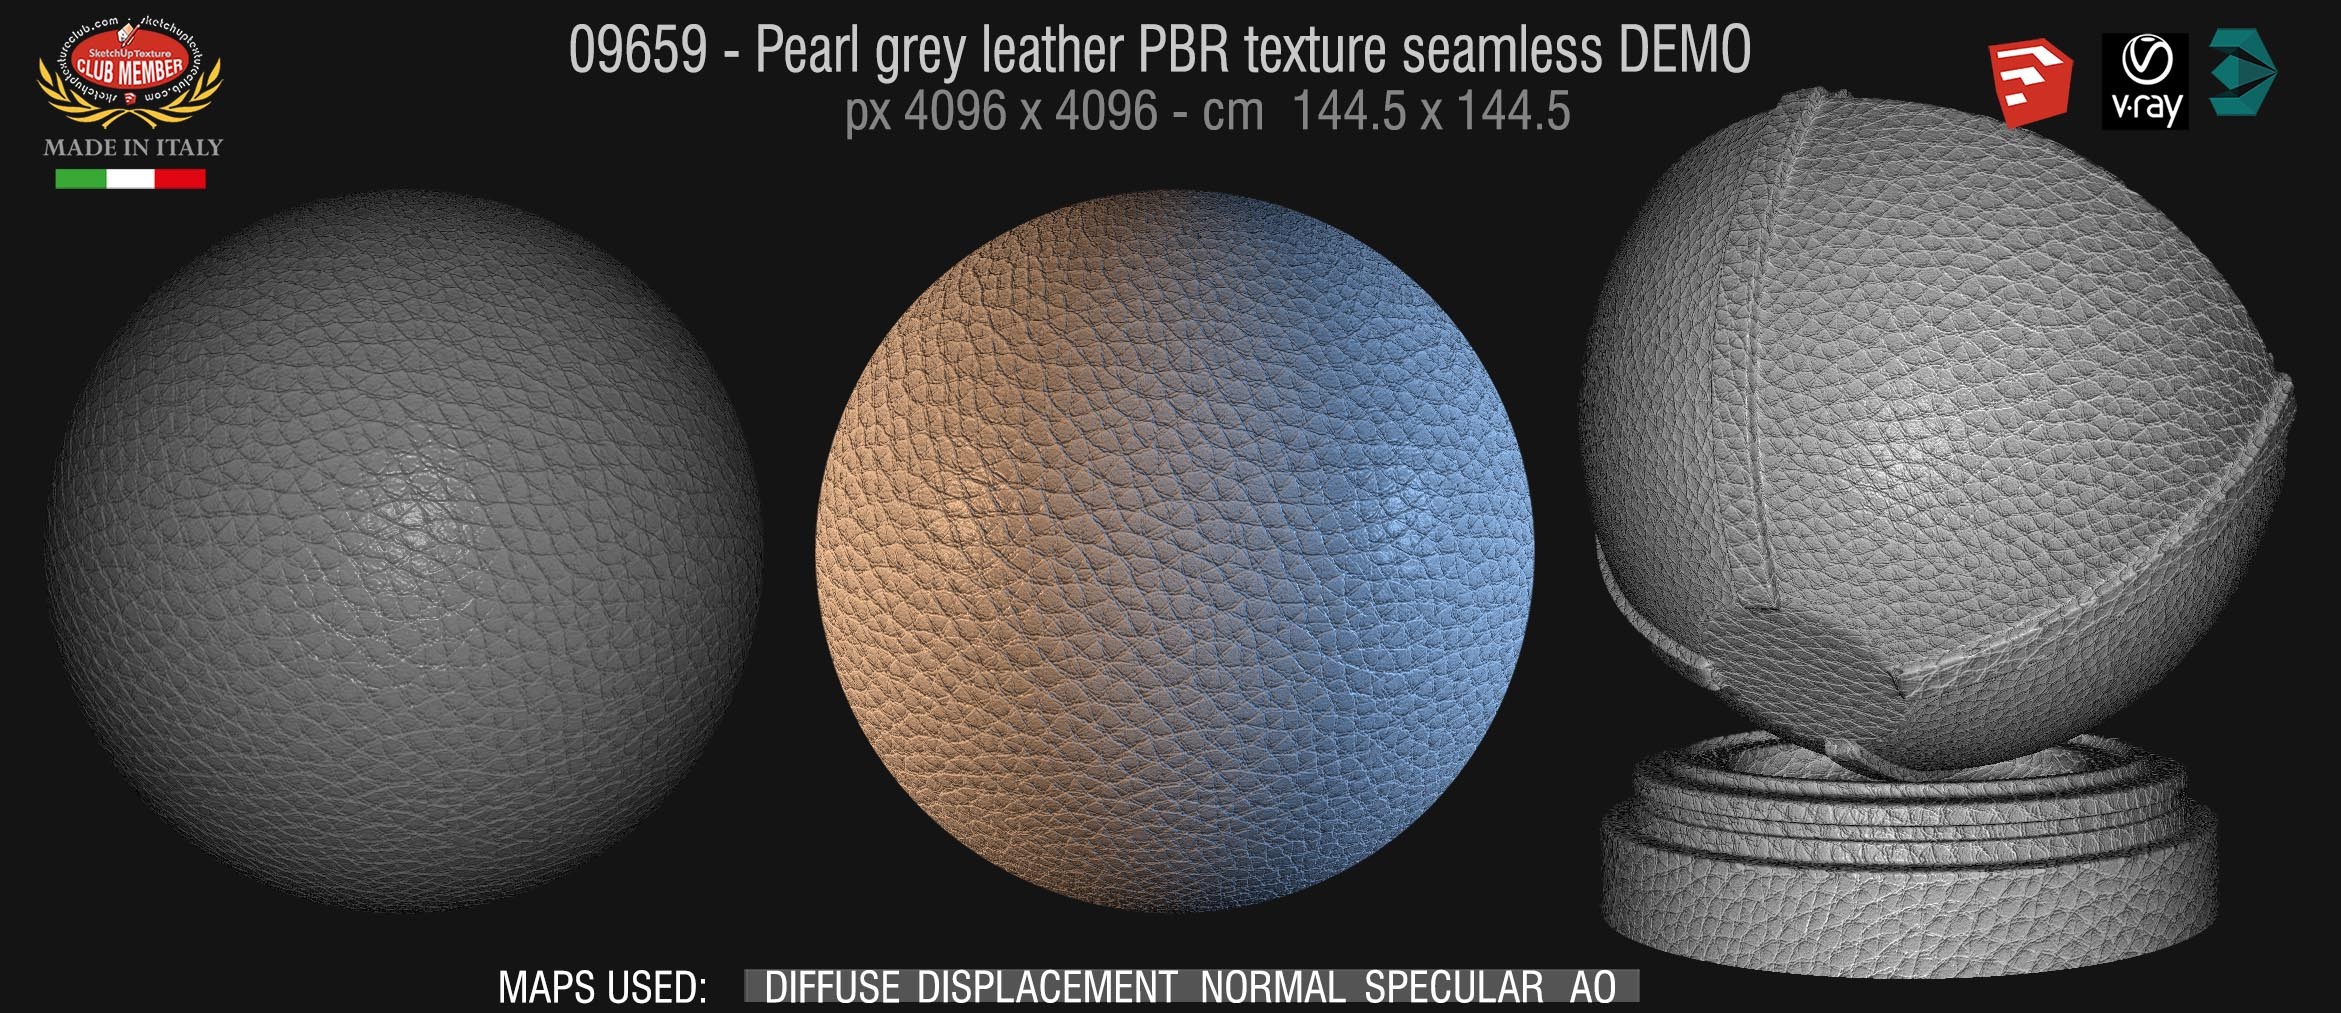 09659 Pearl grey leather PBR texture seamless DEMO